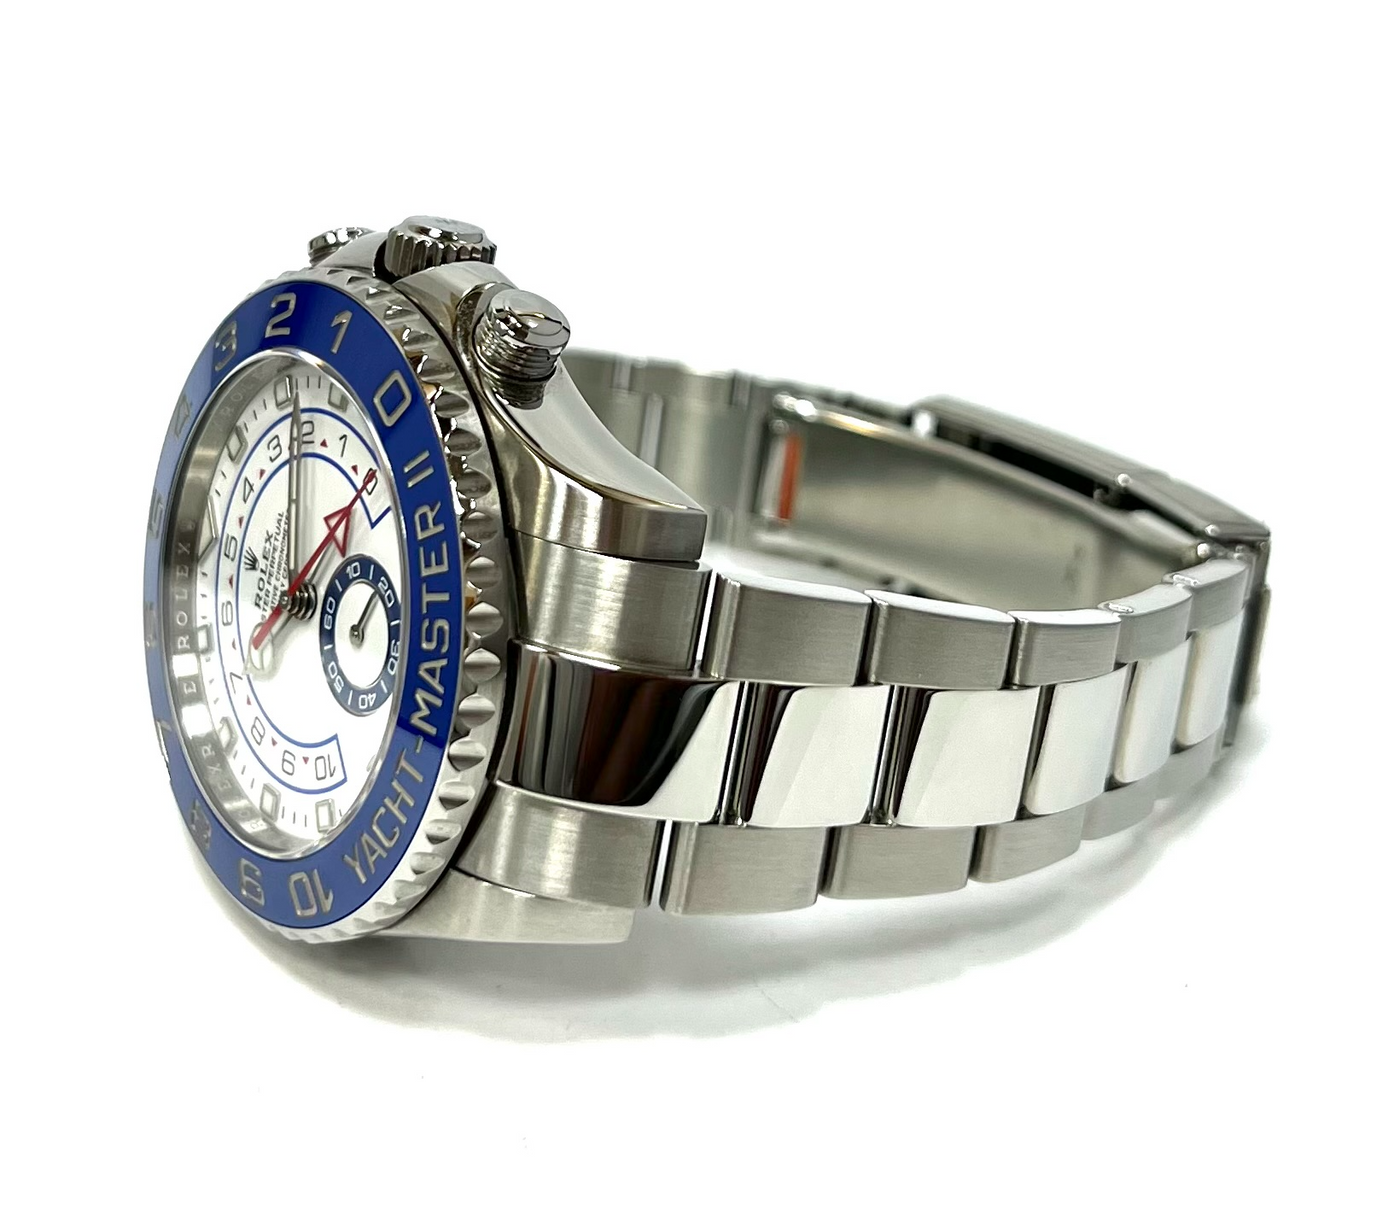 Rolex Yachtmaster II Stainless steel